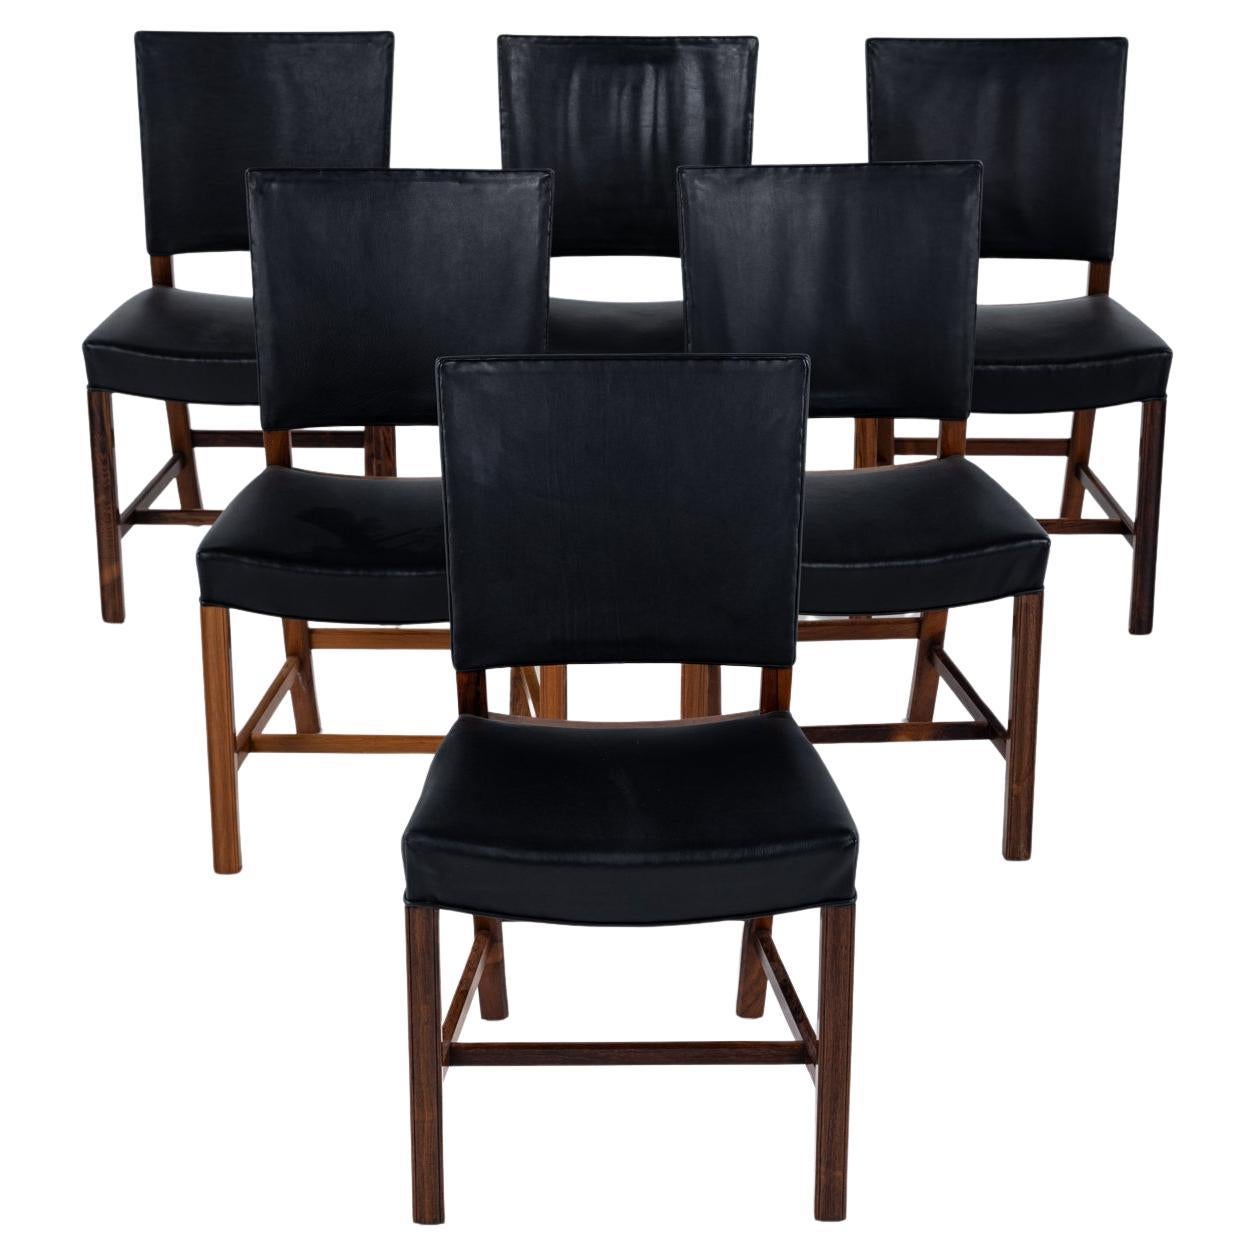 A very rare set of Rio rosewood Barcelona chairs by Kaare Klint For Sale